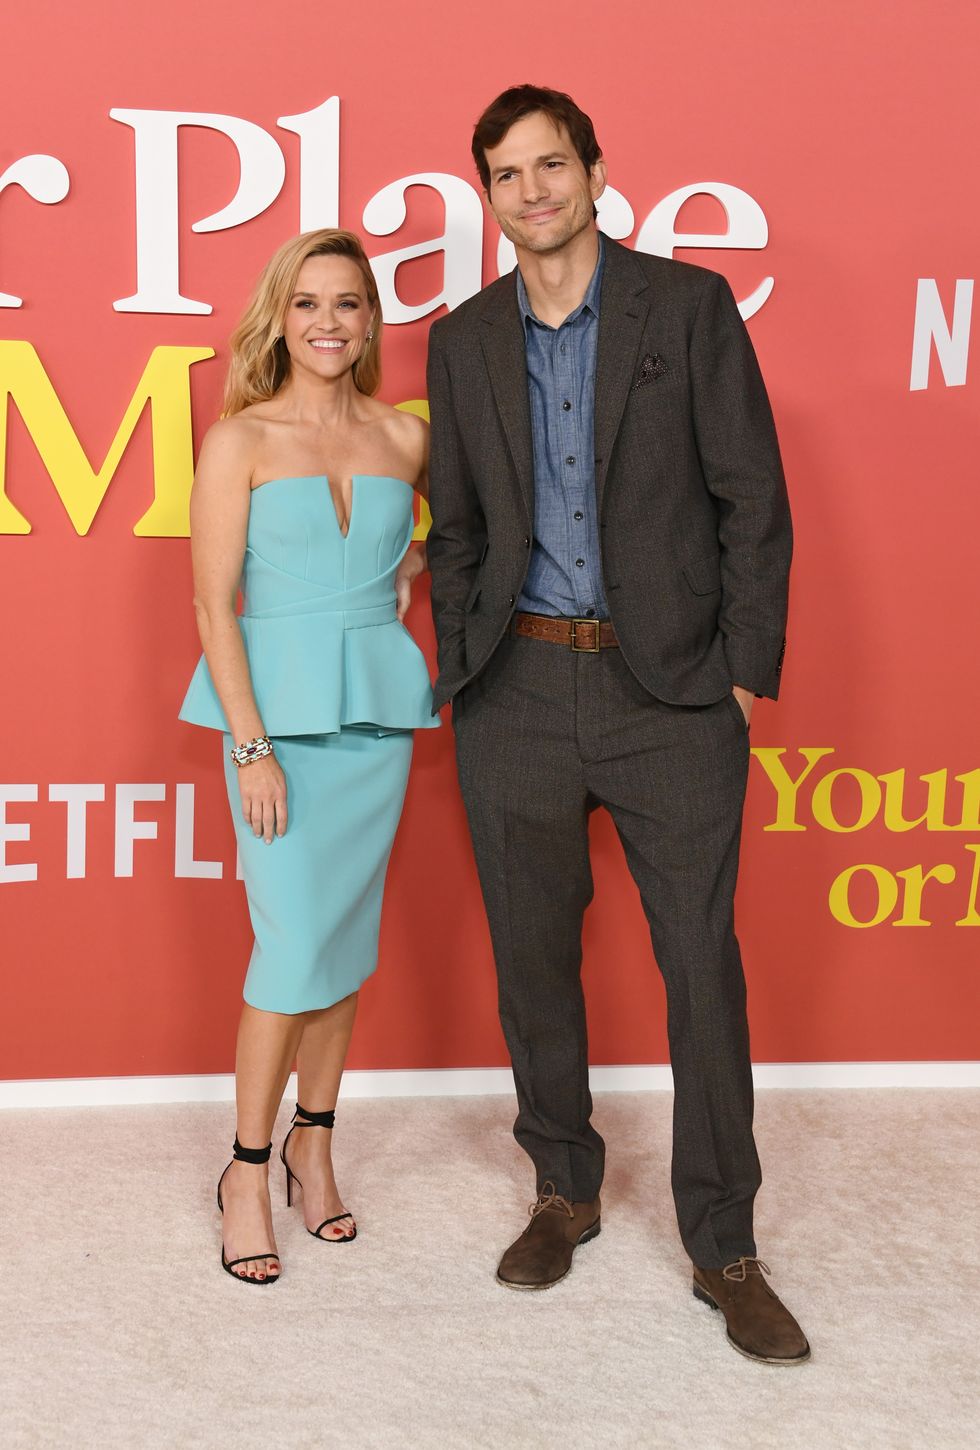 reese witherspoon and ashton kutcher at your place or mine premiere